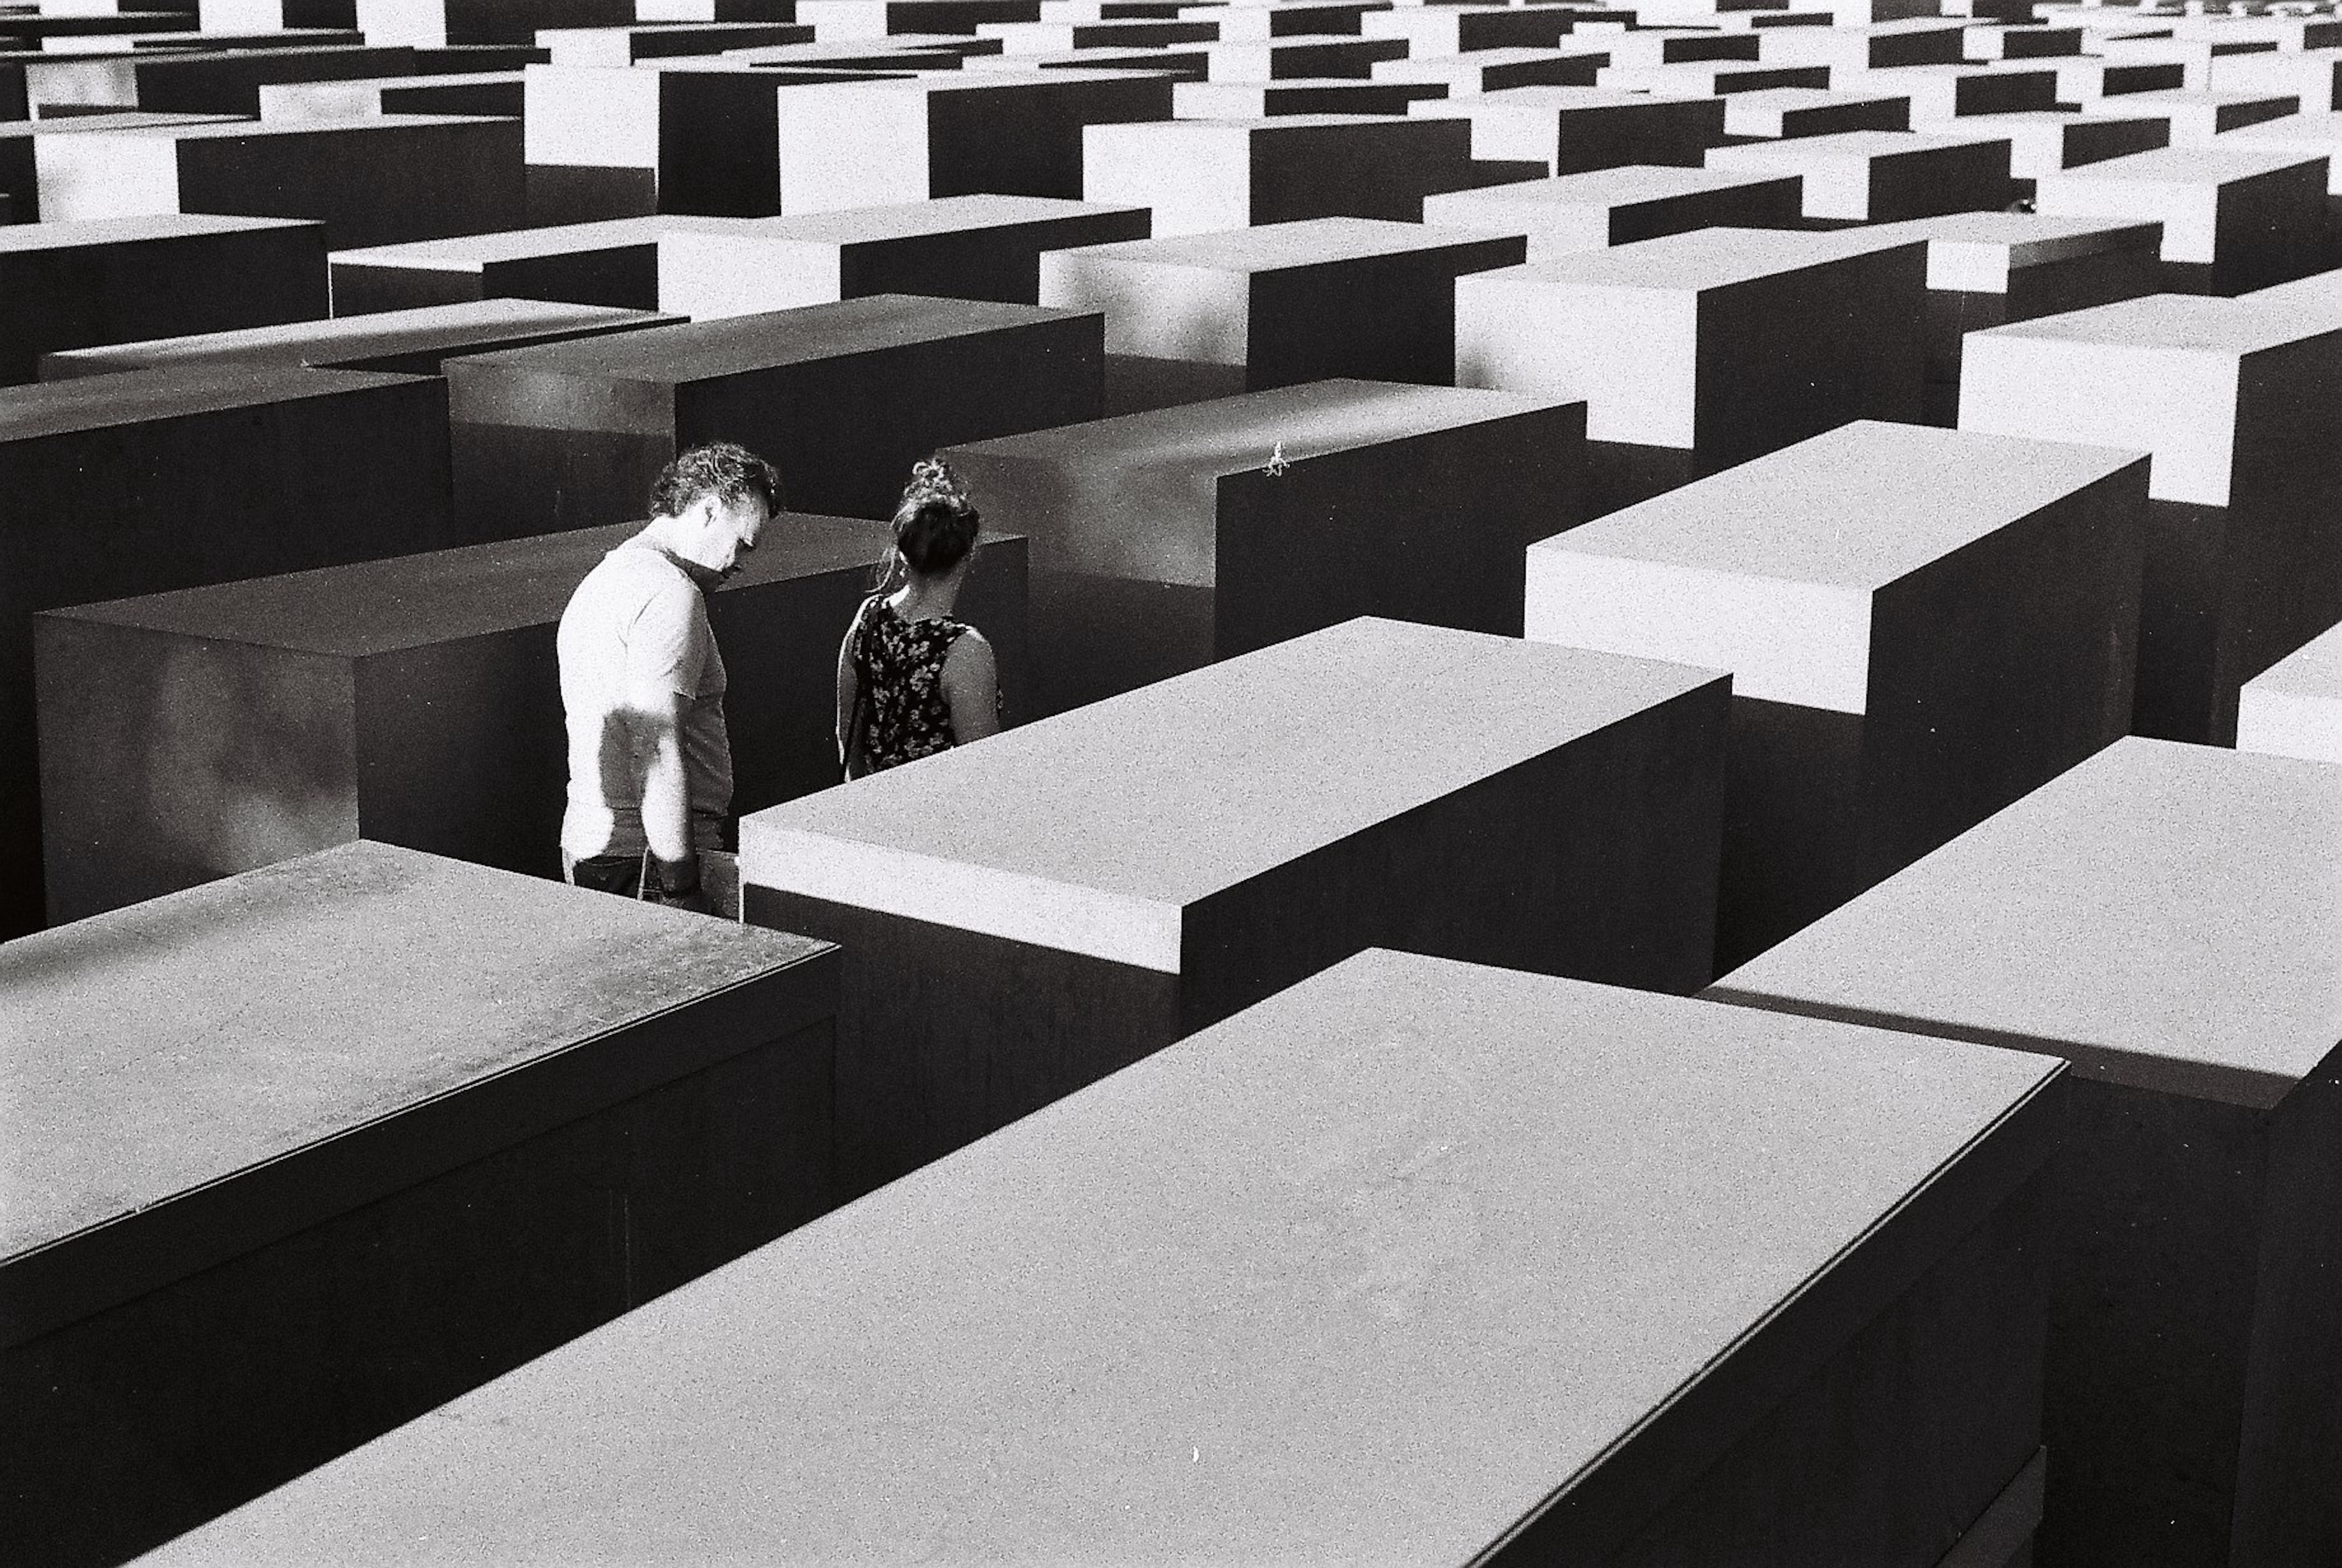 Two people in Holocaust memorial - black and white